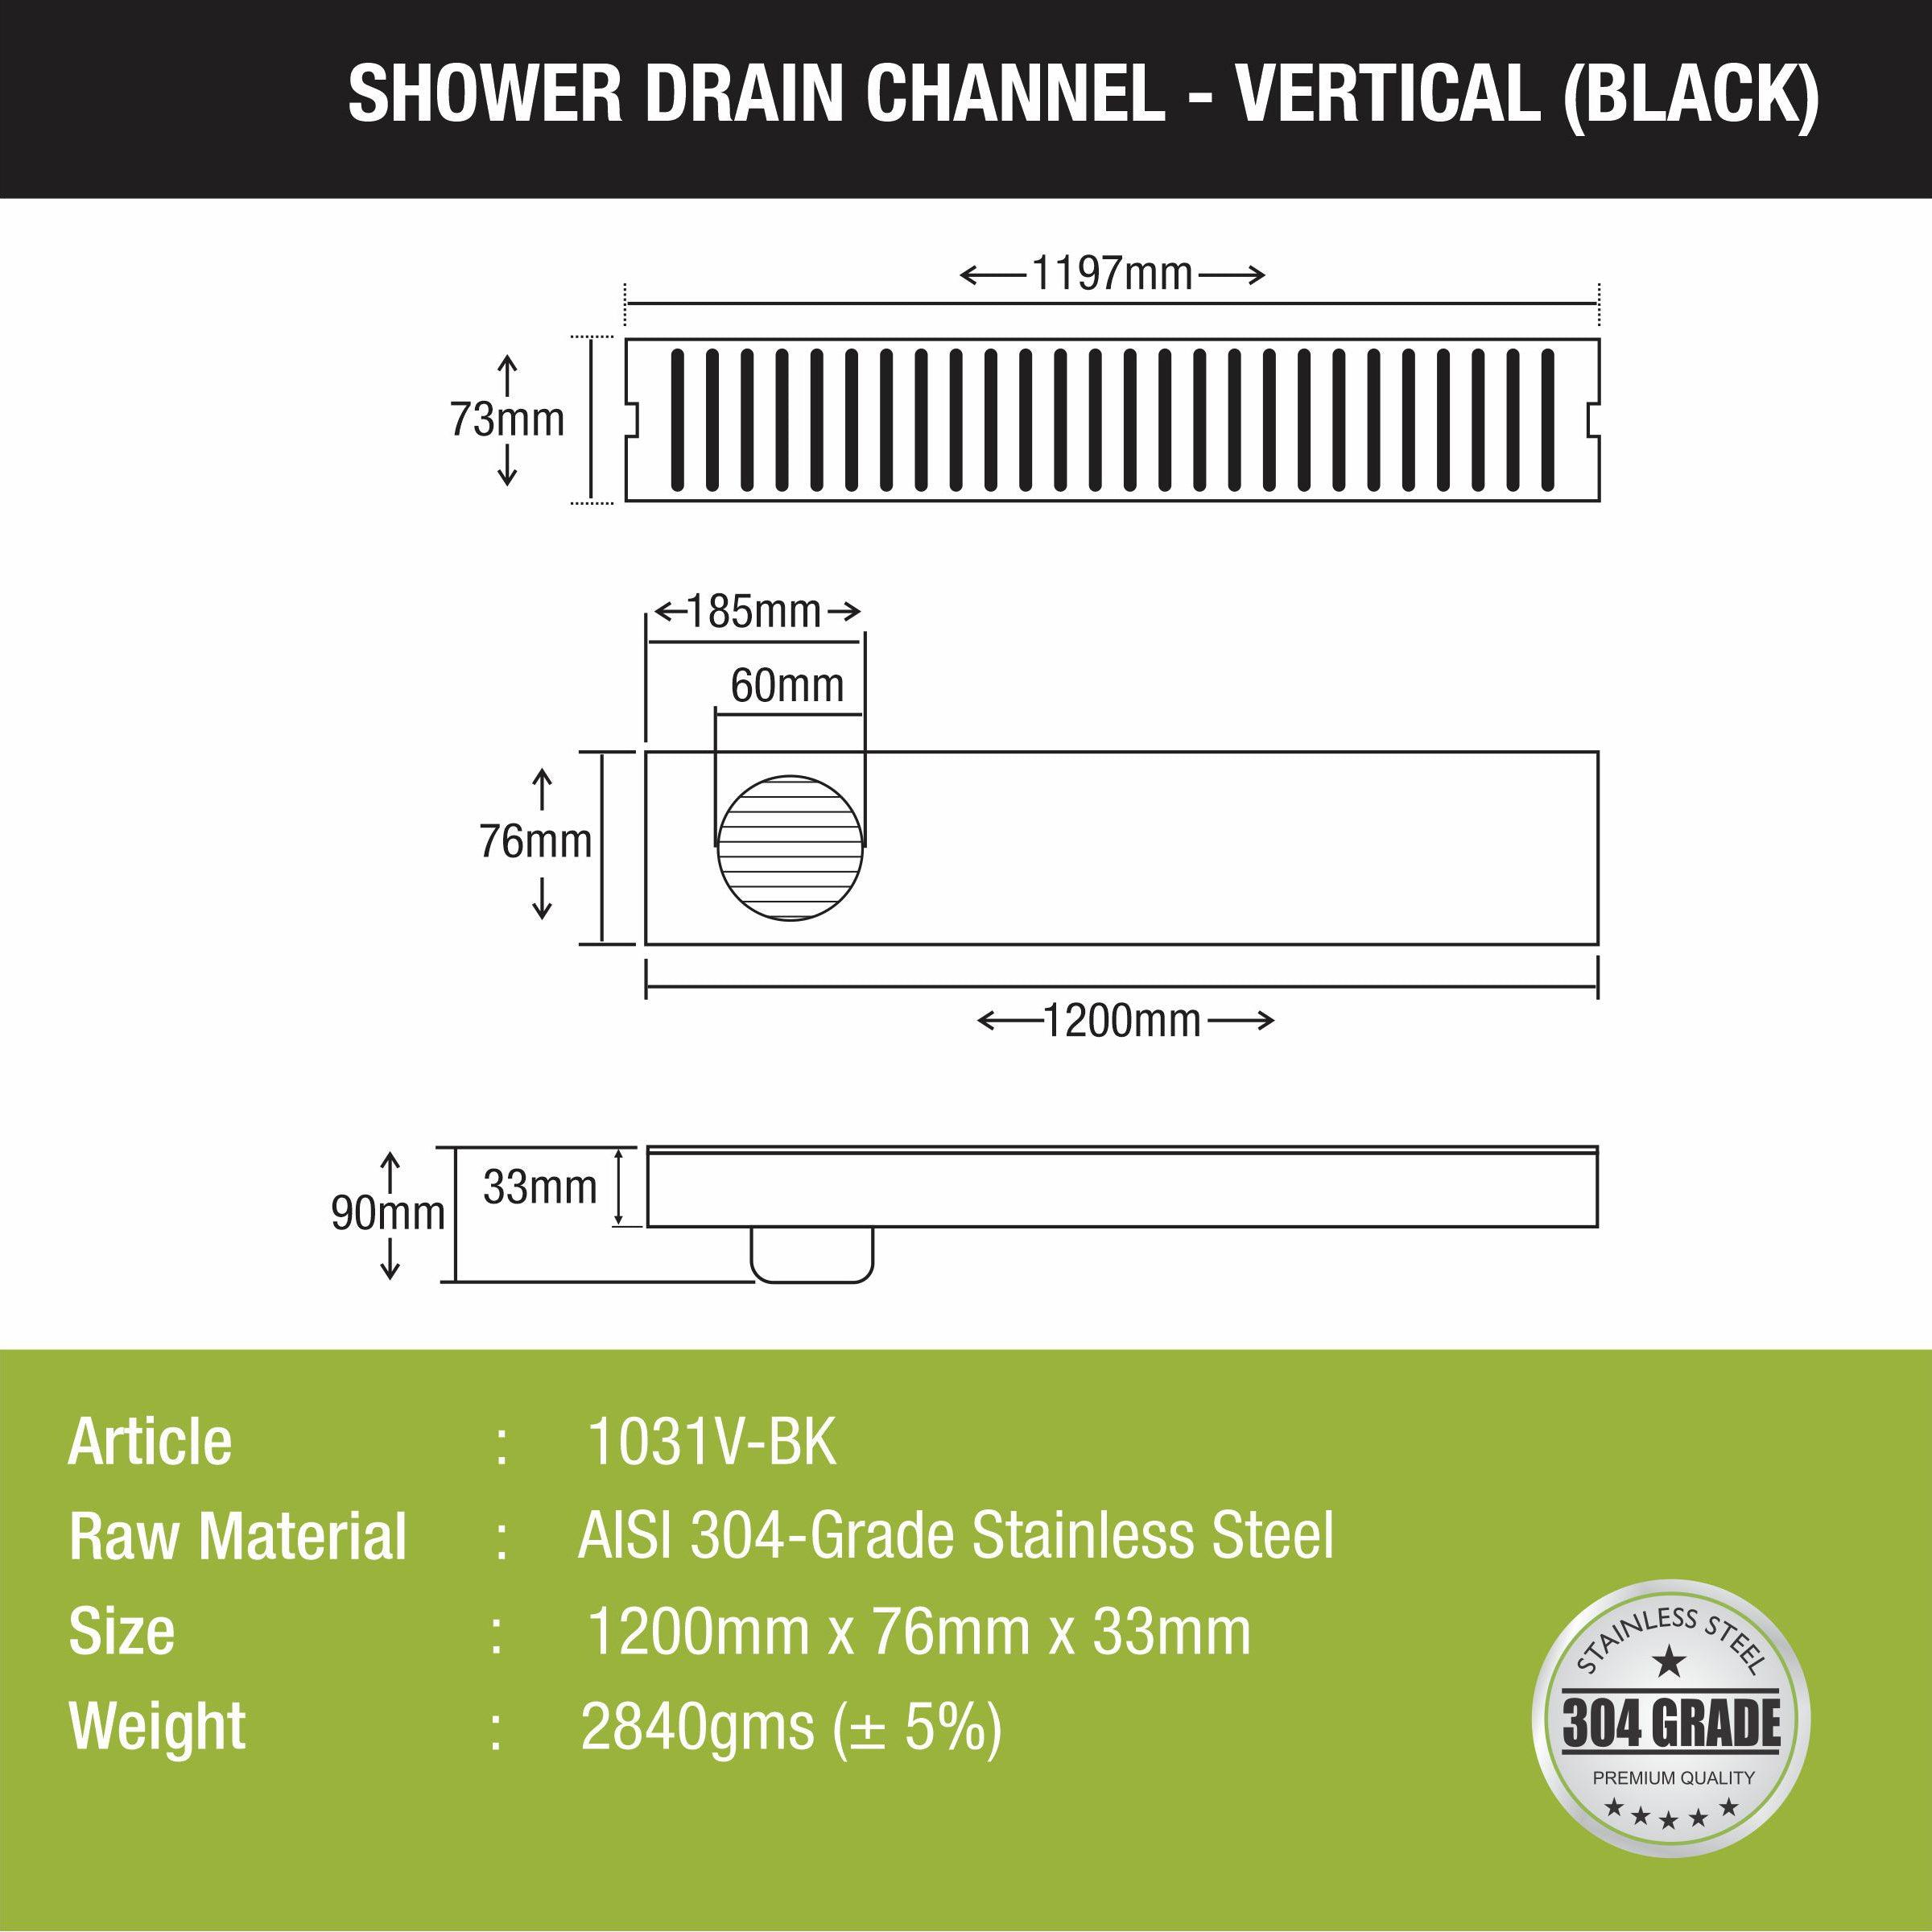 Vertical Shower Drain Channel - Black (48 x 3 Inches) size and measurement